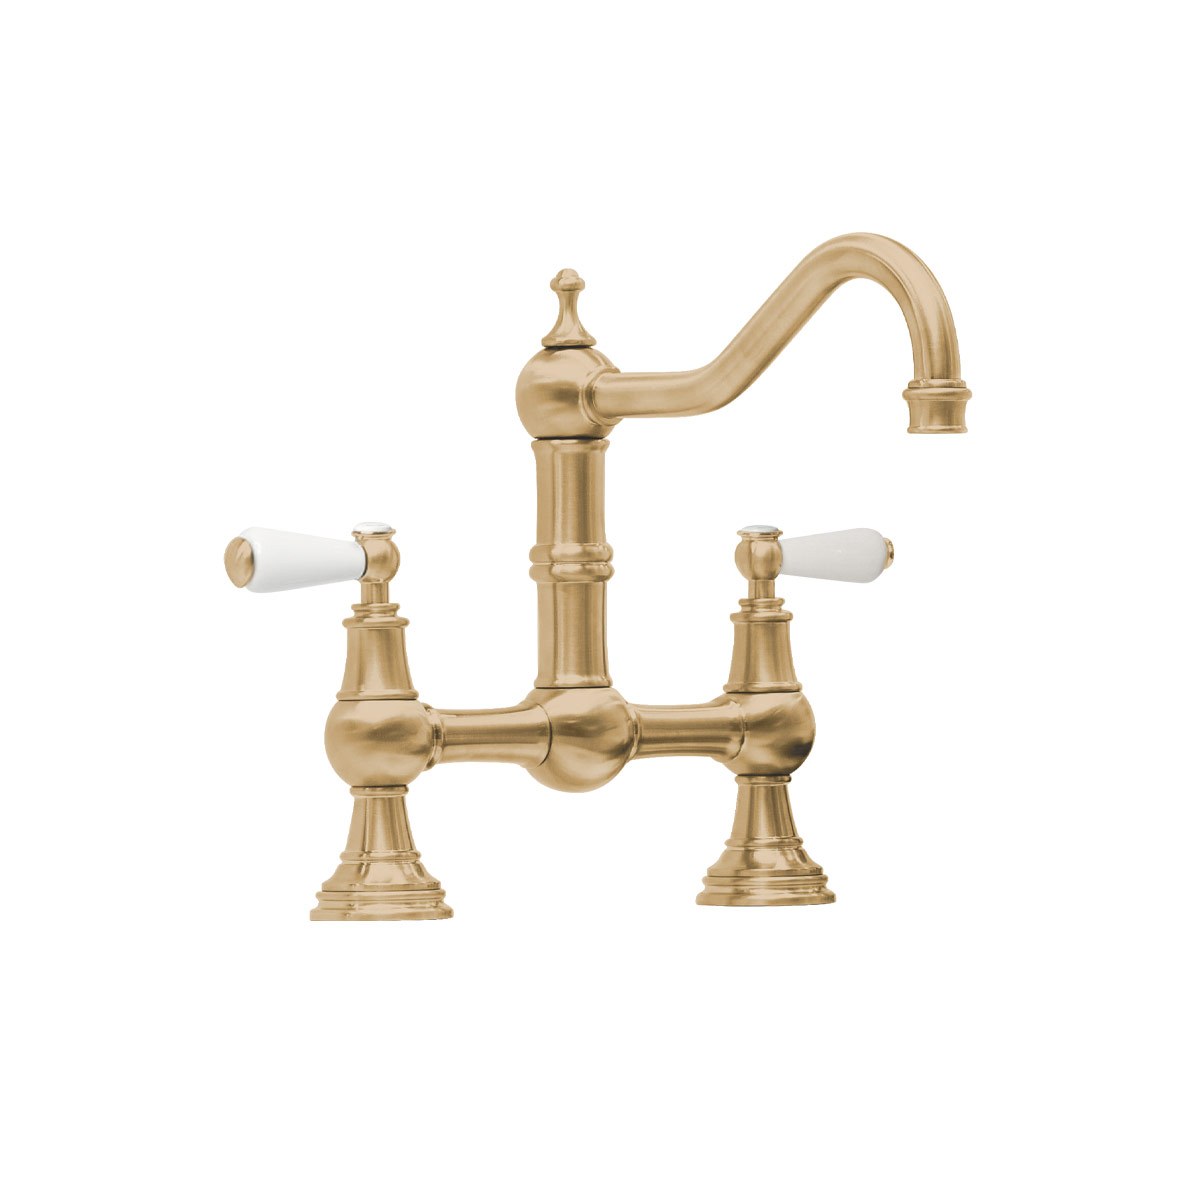 Shaws by Perrin & Rowe Hambleton French bridge mixer in Satin Brass. Provence style kitchen tap AUSH.4751. Distributed in Australia by Luxe by Design, Brisbane.